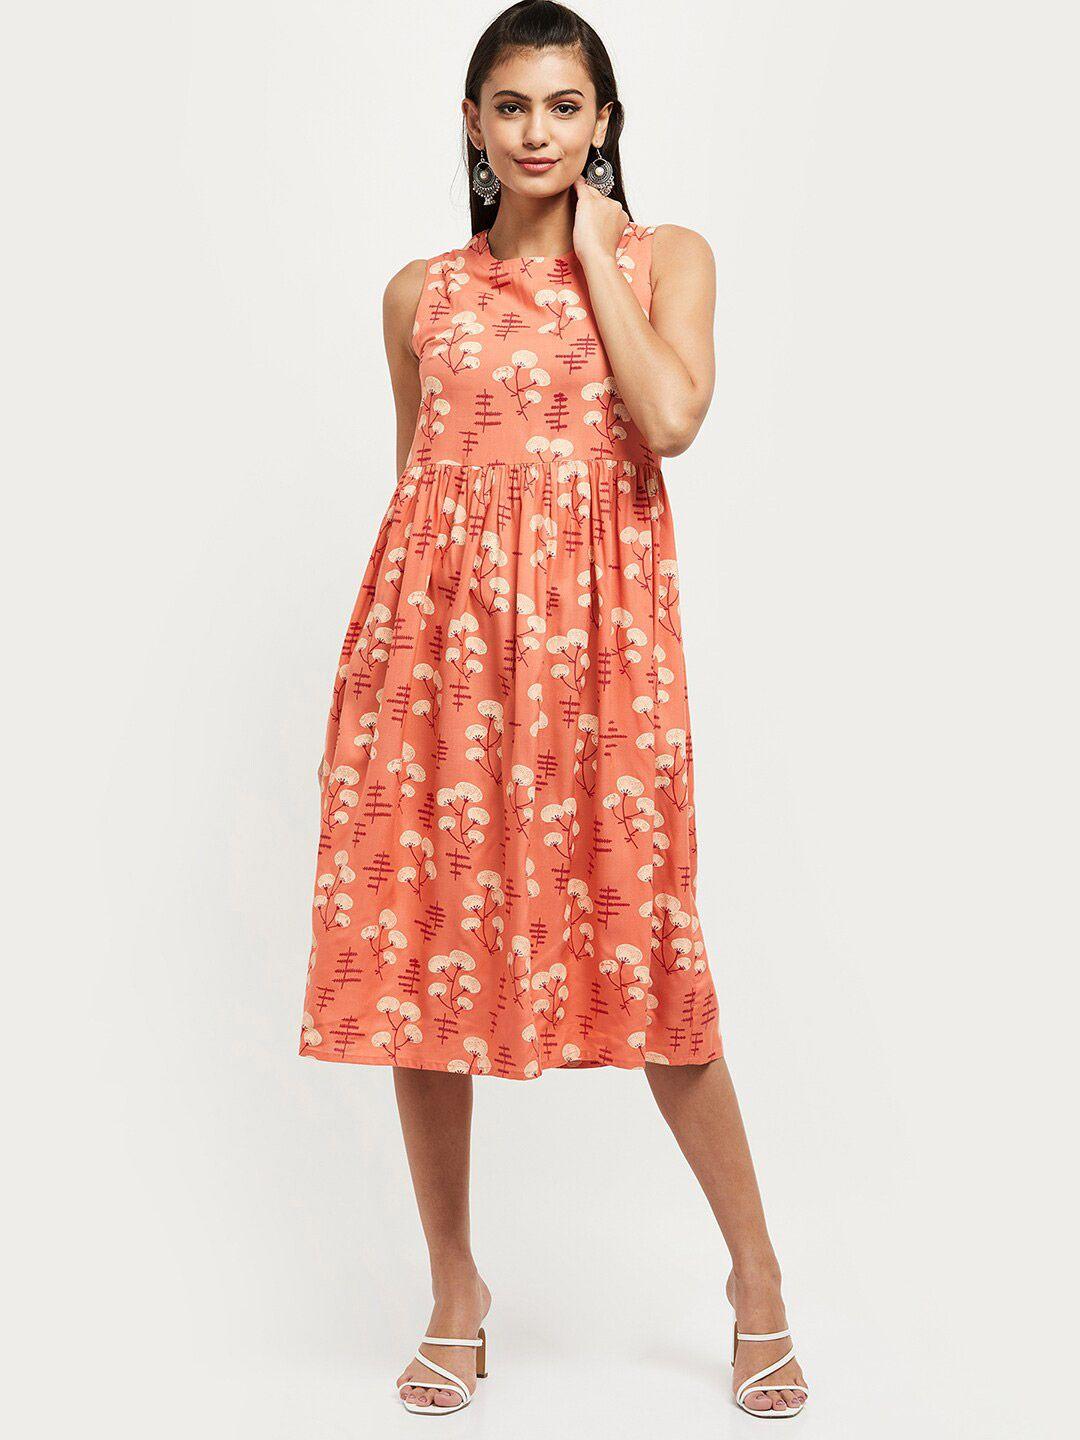 max peach-coloured floral print fit and flare dress